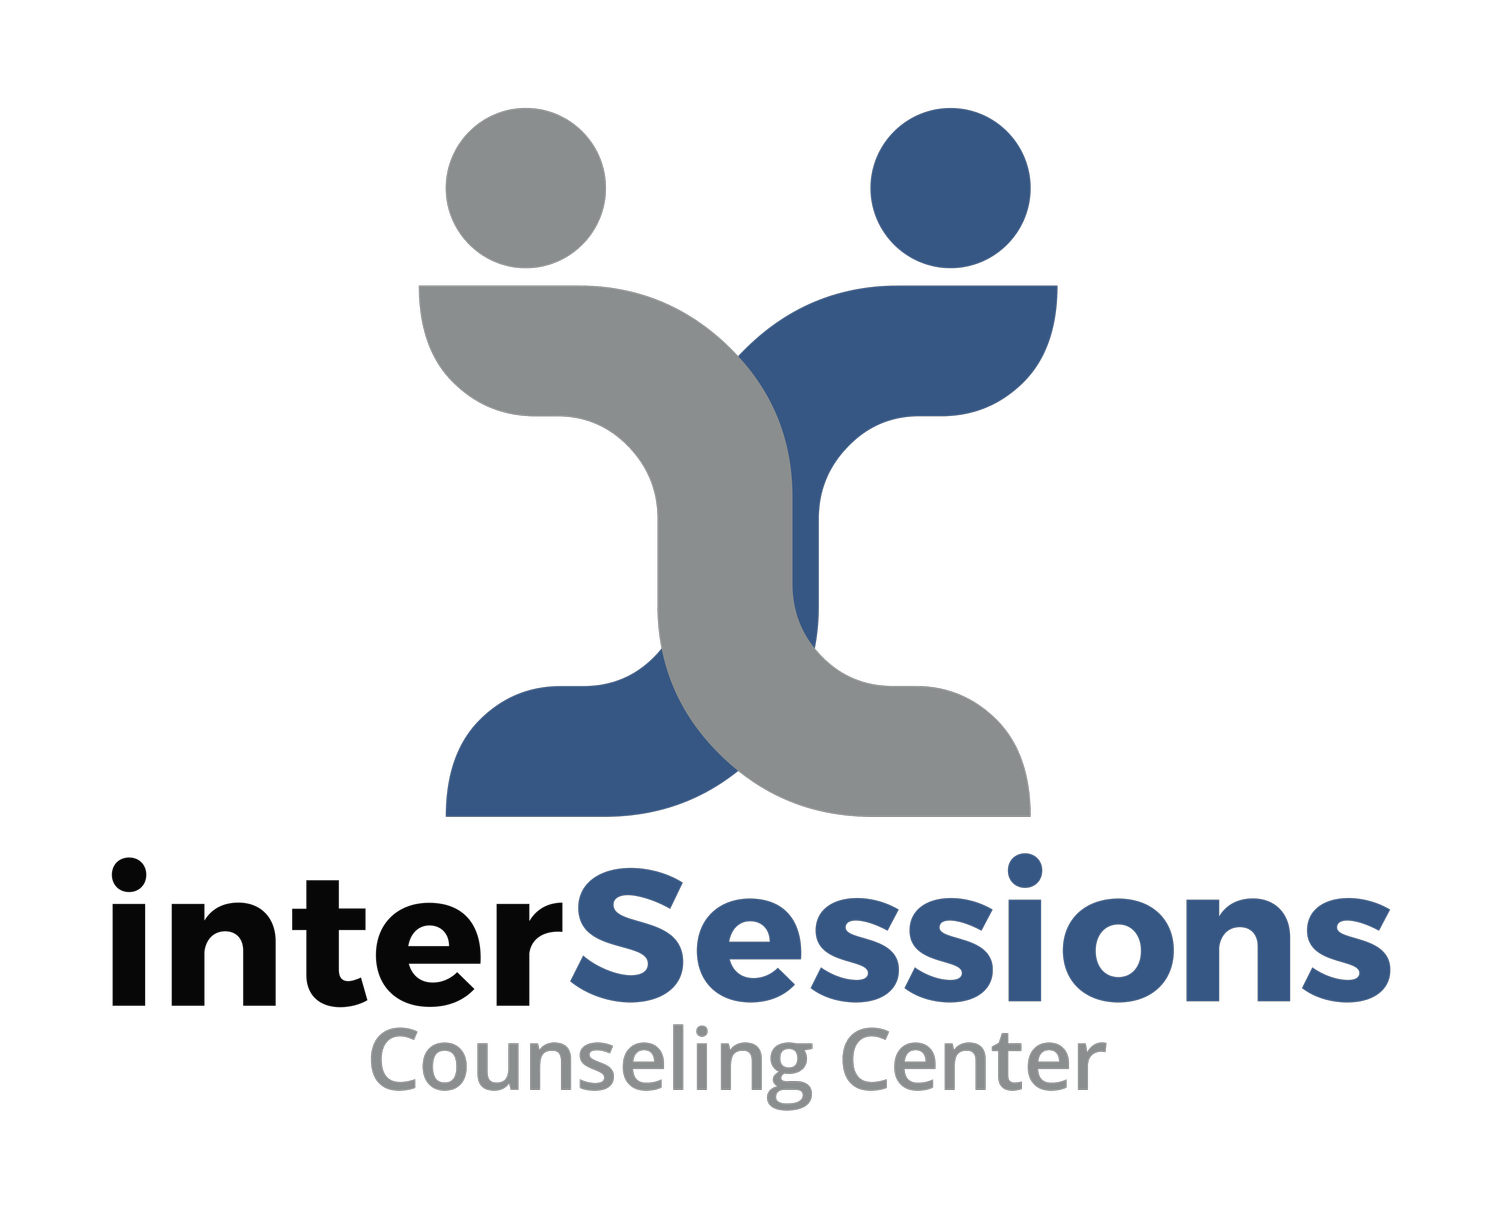 interSessions Mental Health Clinic